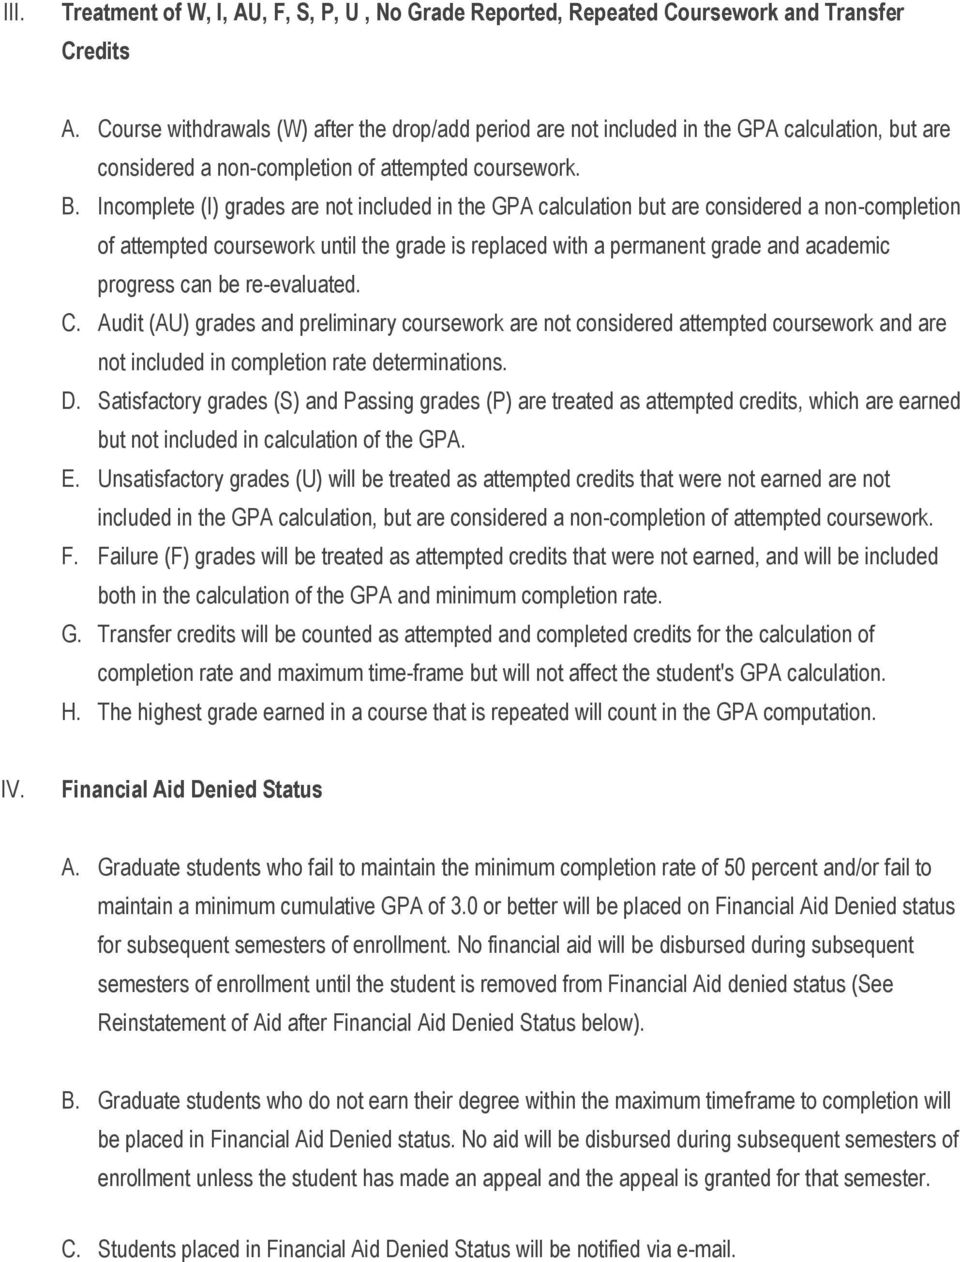 Incomplete (I) grades are not included in the GPA calculation but are considered a non-completion of attempted coursework until the grade is replaced with a permanent grade and academic progress can